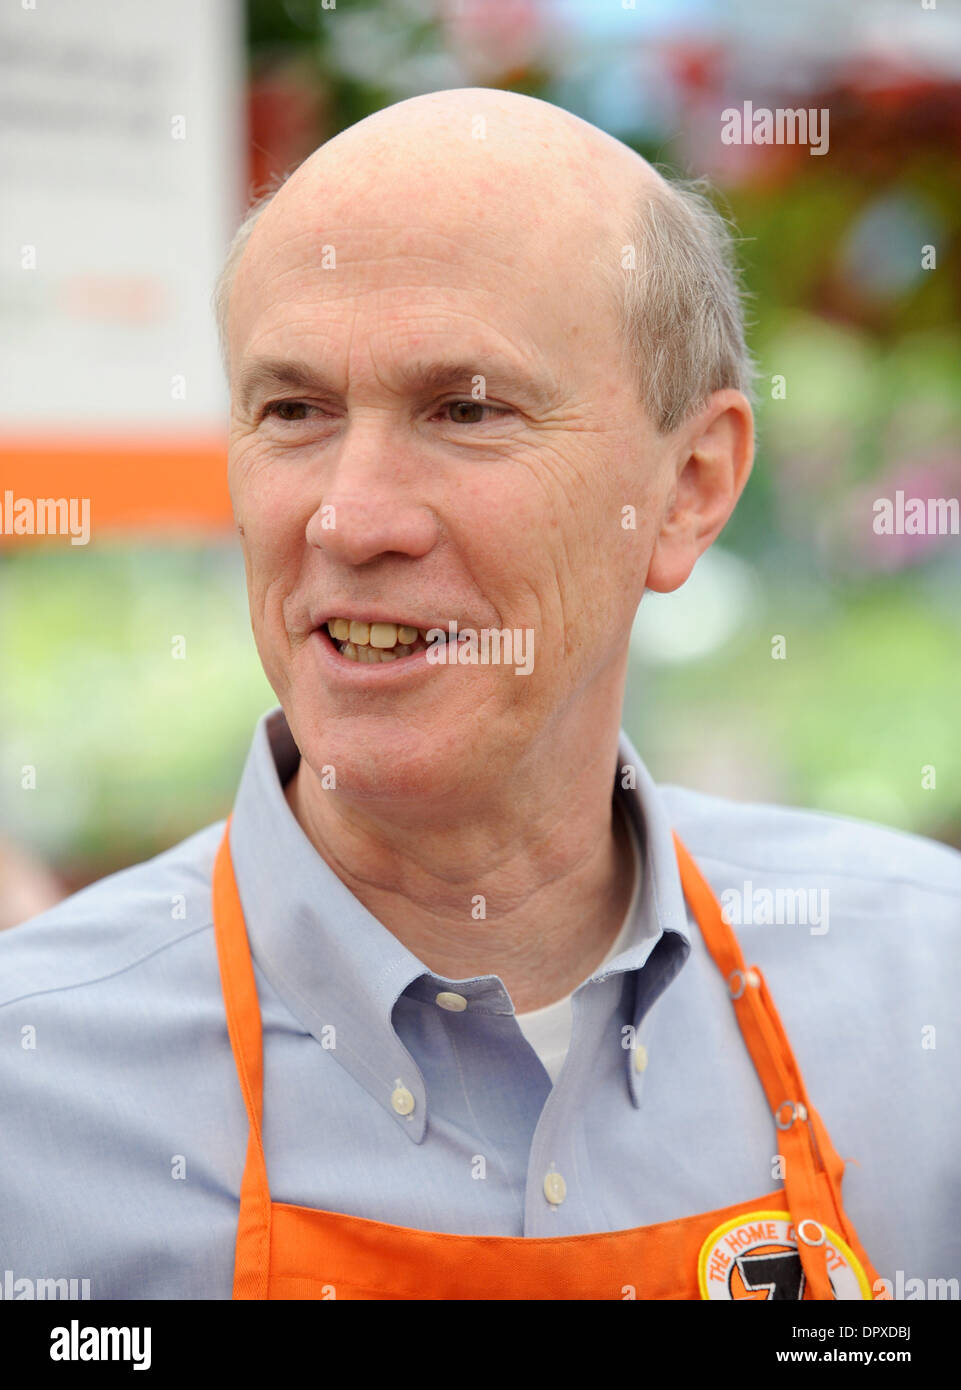 Apr 29, 2009 - Atlanta, Georgia, USA - The Home Depot Inc. posted a 44 percent increase in its first-quarter profit on Tuesday. PICTURED: The Home Depot CEO and Chairman FRANK BLAKE at one of the company's stores in Atlanta, Georgia on Wednesday, April 29, 2009. (Credit Image: © Erik Lesser/ZUMA Press) Stock Photo